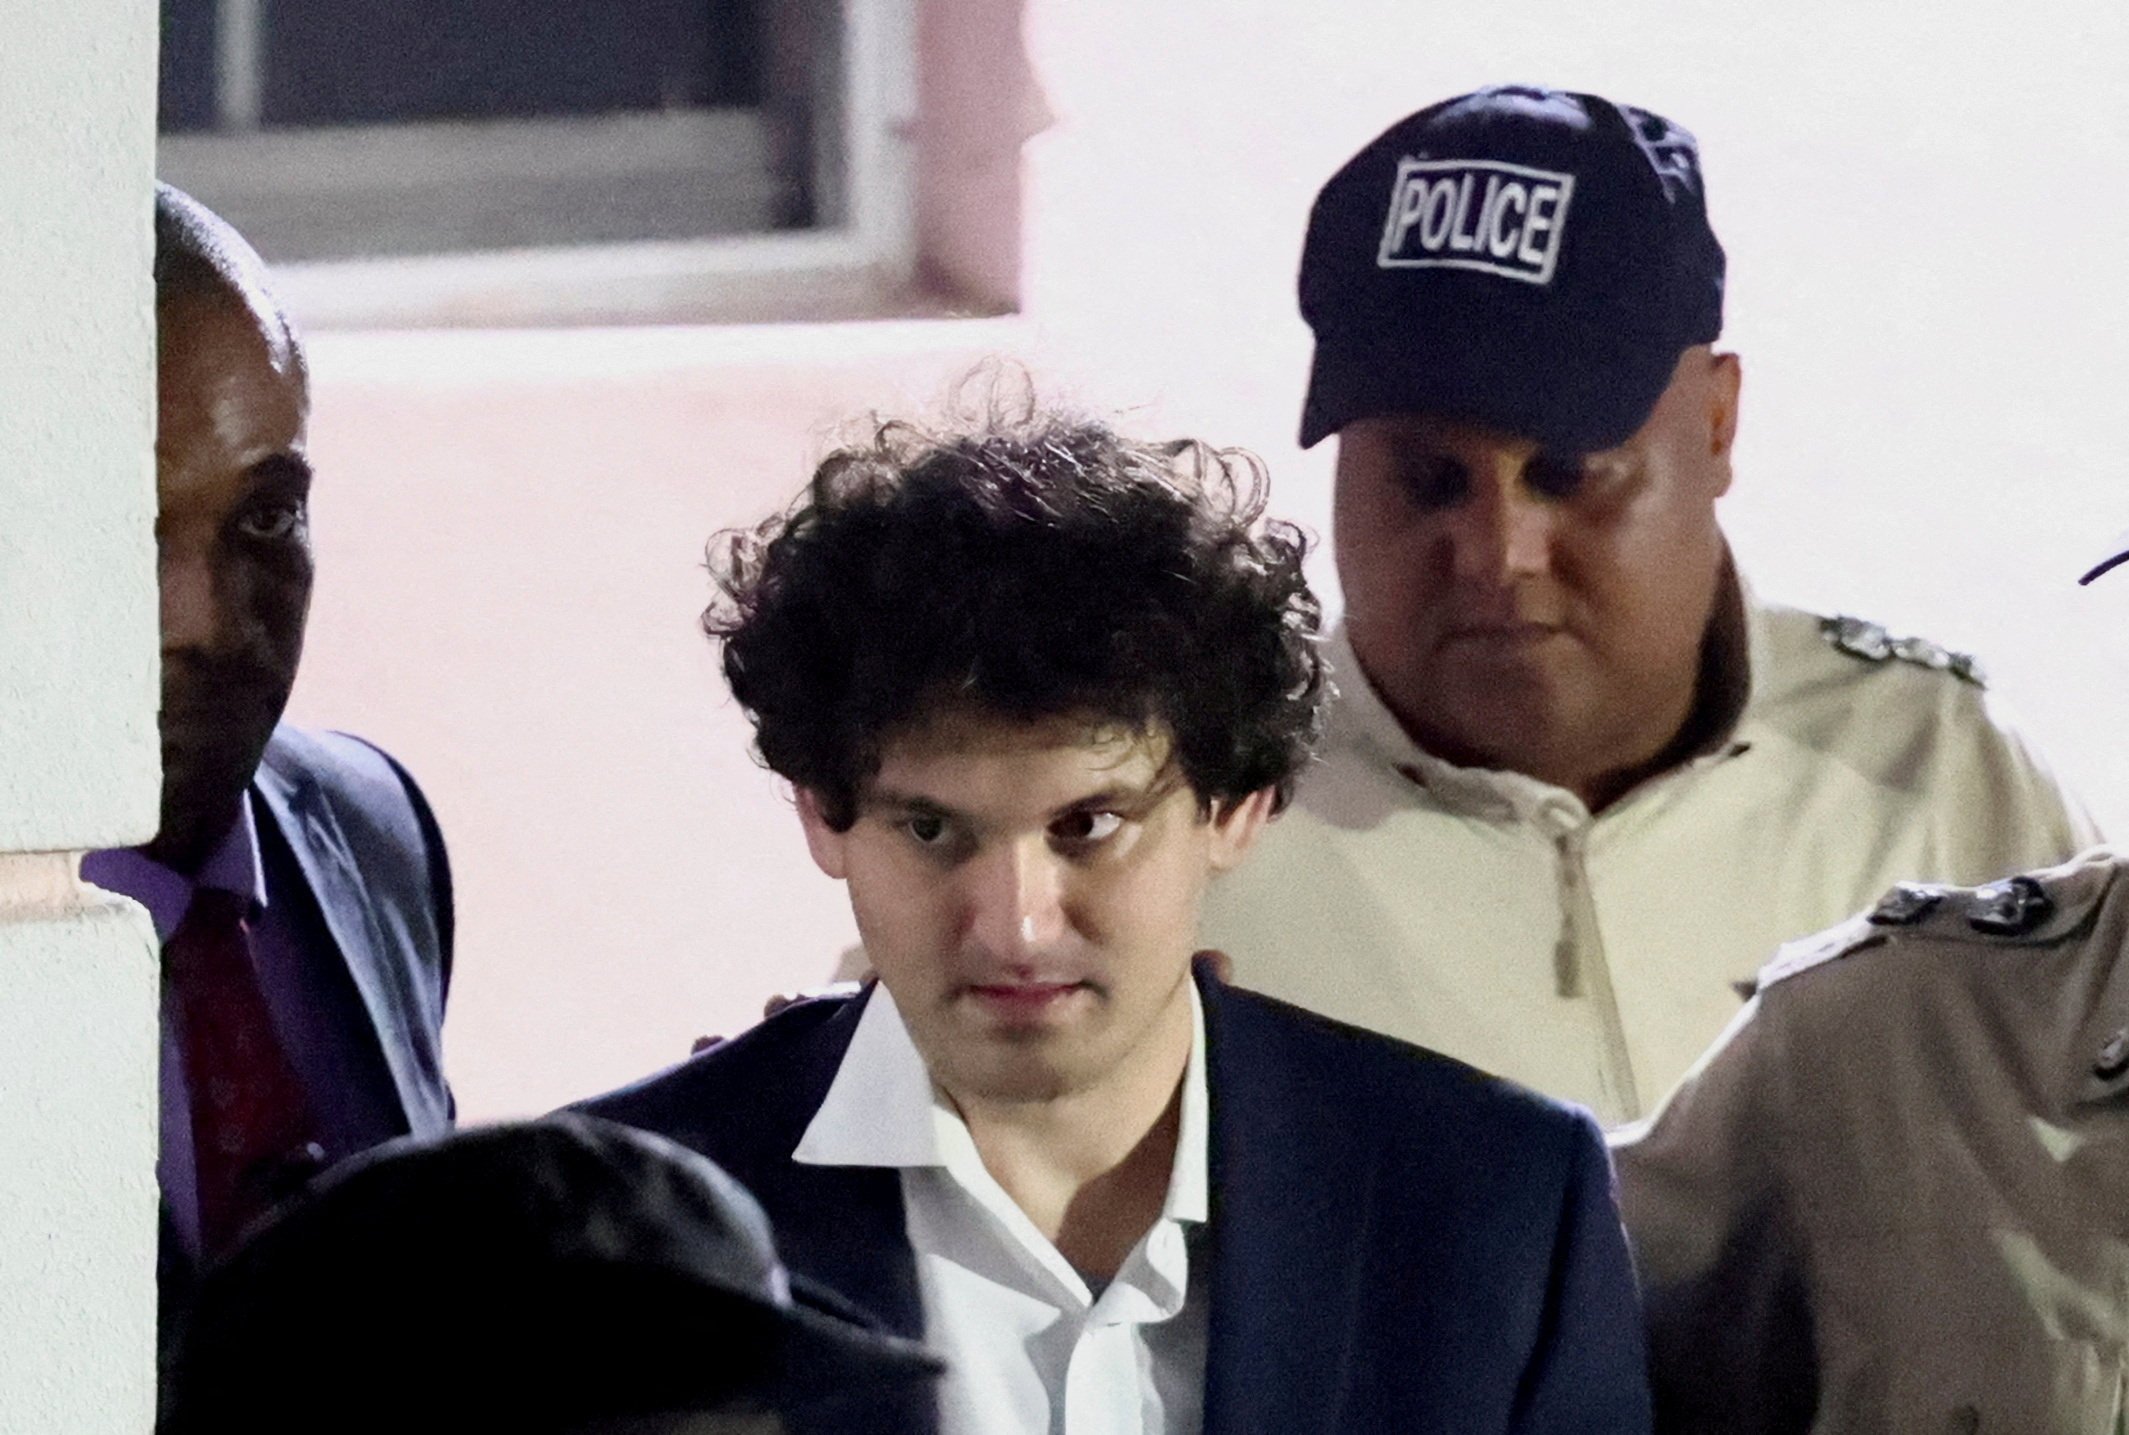 Sam Bankman-Fried is escorted out of the Magistrate Court building after his arrest in Nassau, Bahamas on December 13. Photo: Reuters